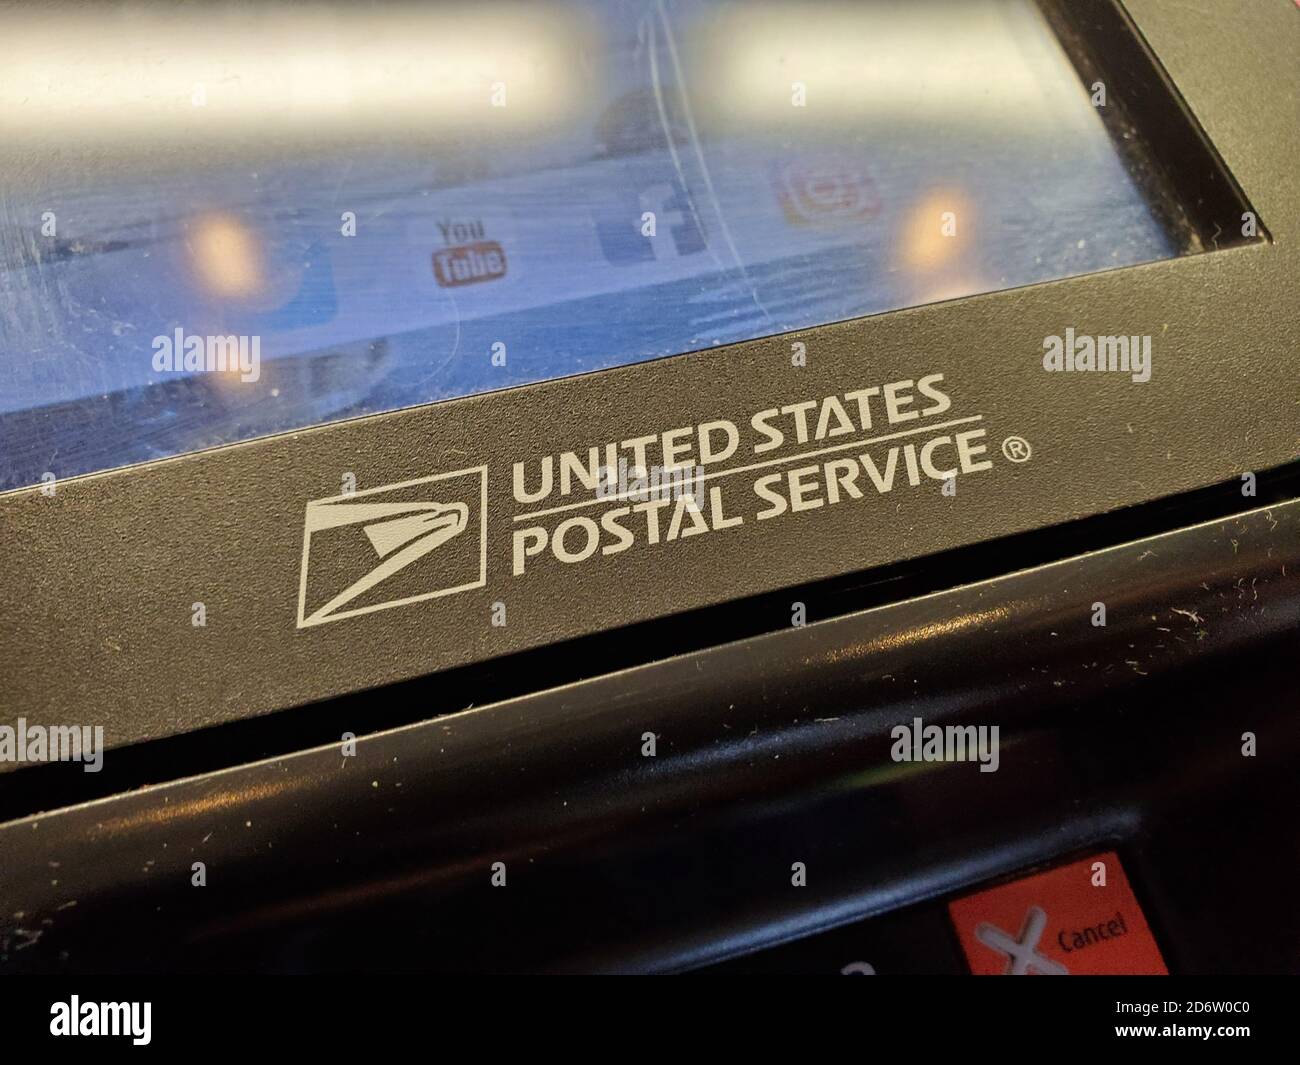 Close-up of logo for United States Postal Service on edge of computer screen on payment acceptance kiosk, San Ramon, California, August 28, 2020. () Stock Photo